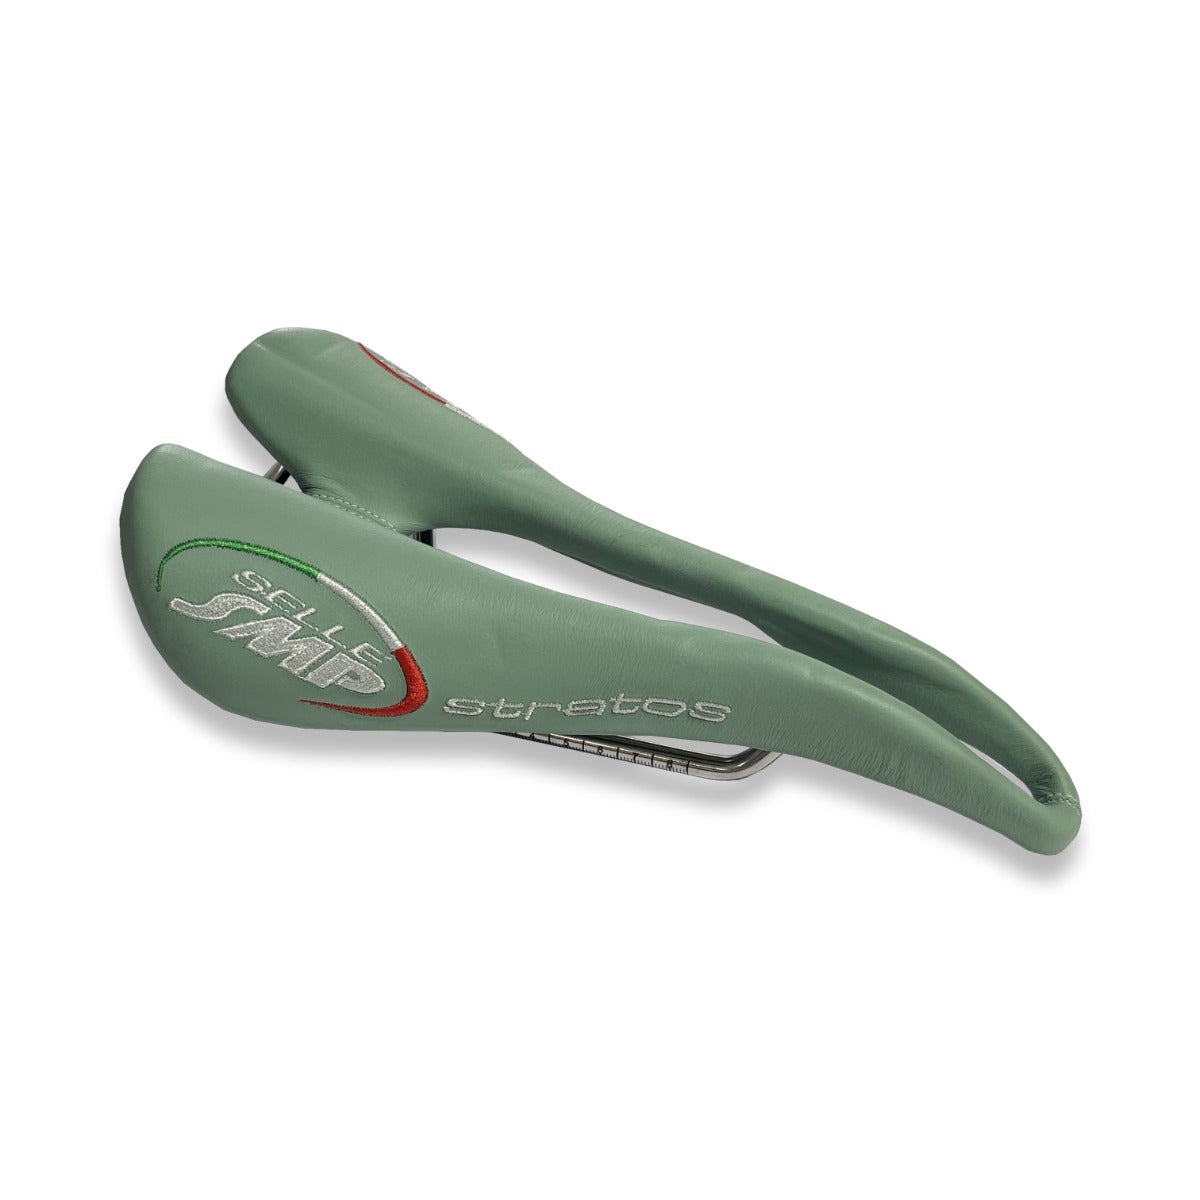 Selle SMP Stratos Saddle- Mint Green